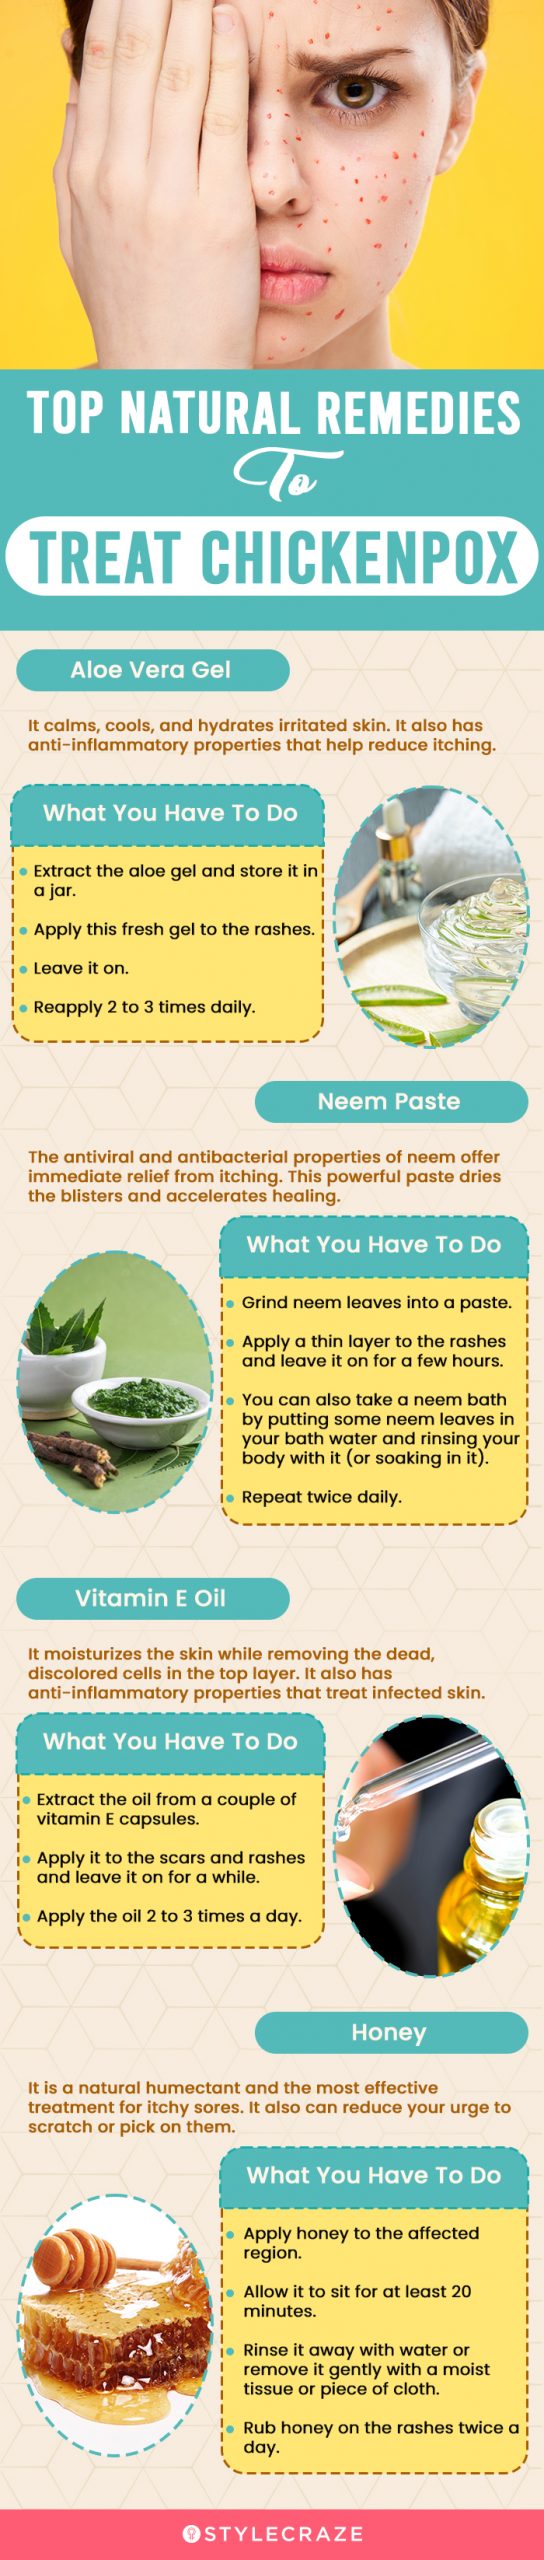 top natural remedies to treat chickenpox (infographic)